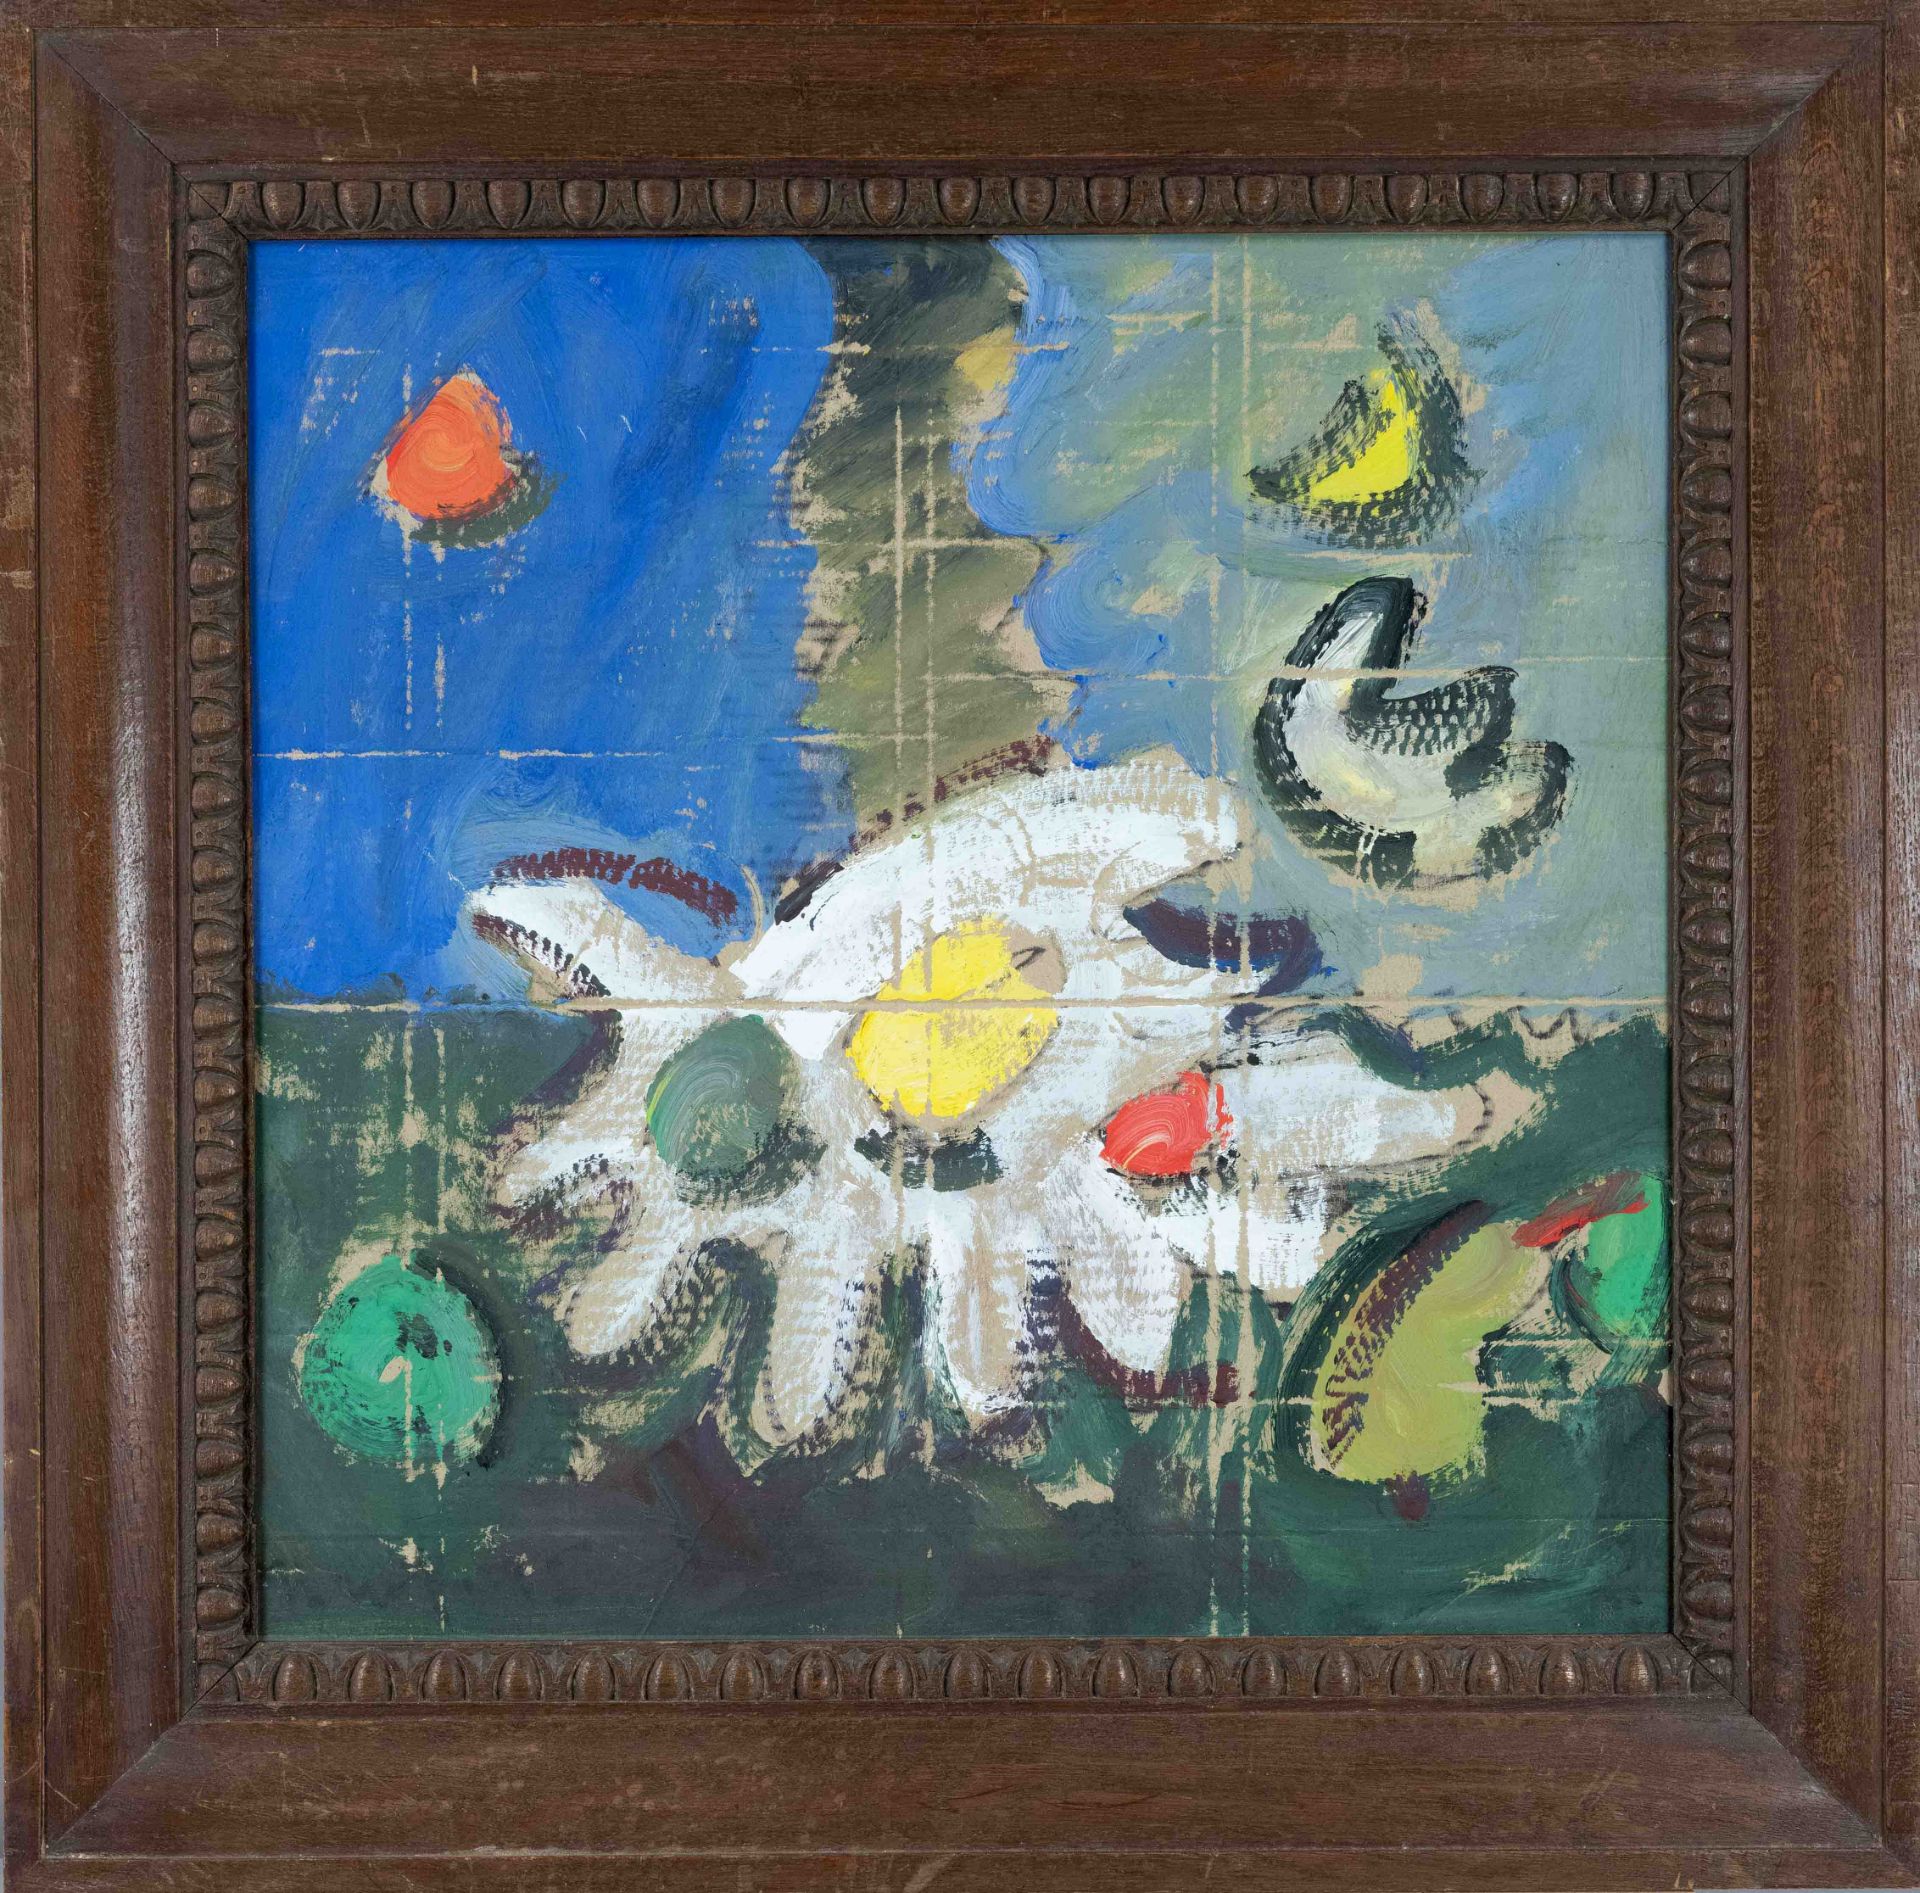 Roland Frenzel (1938-2004), Leipzig artist, abstracted still life with shell or flower shape,